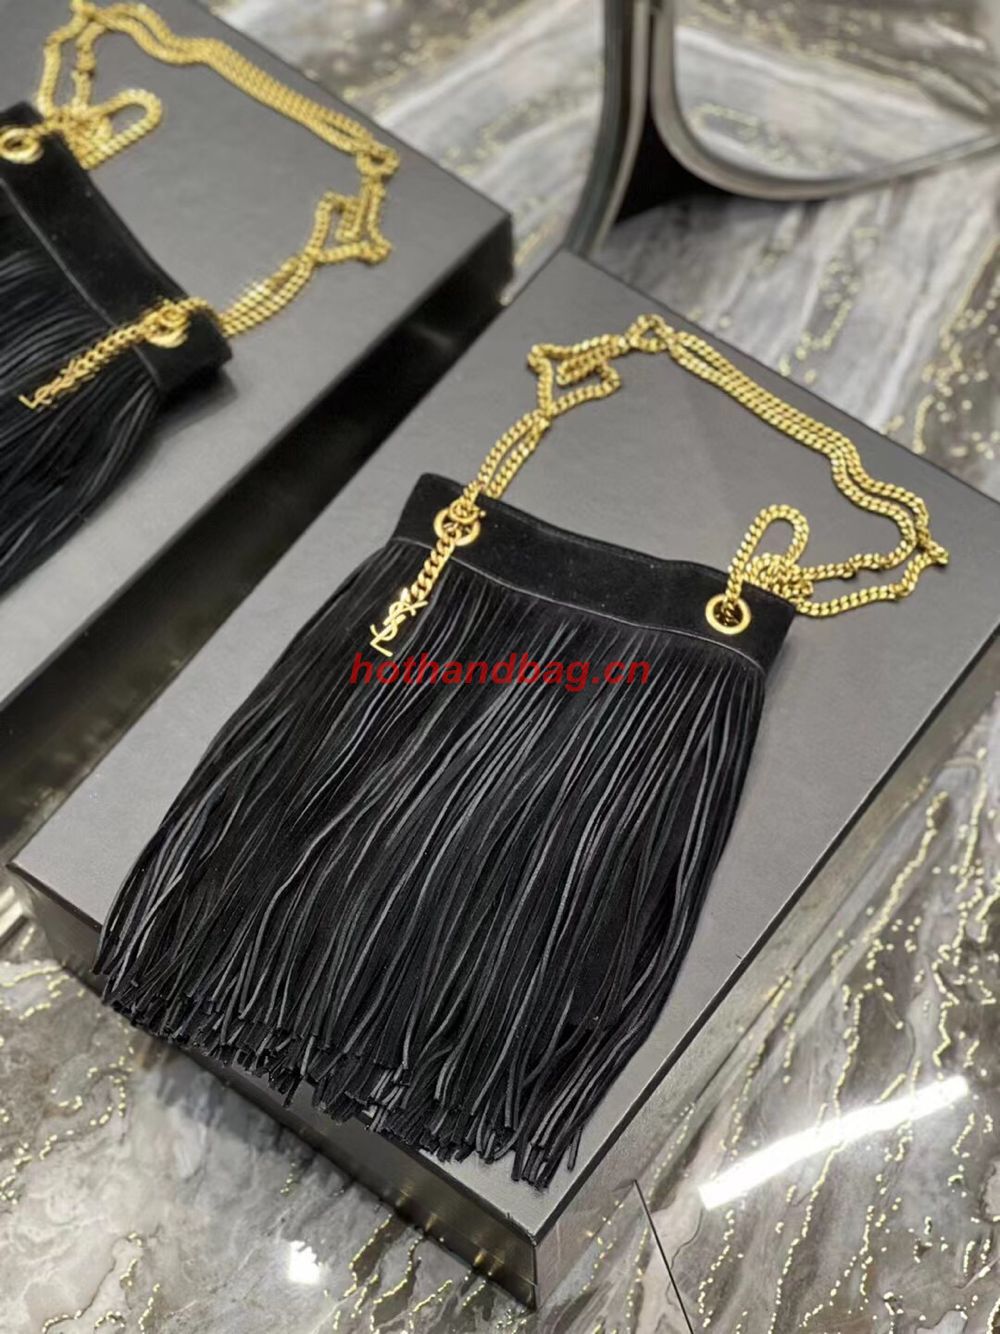 SAINT LAURENT SMALL CHAIN BAG IN LIGHT SUEDE WITH FRINGES 683378 BLACK